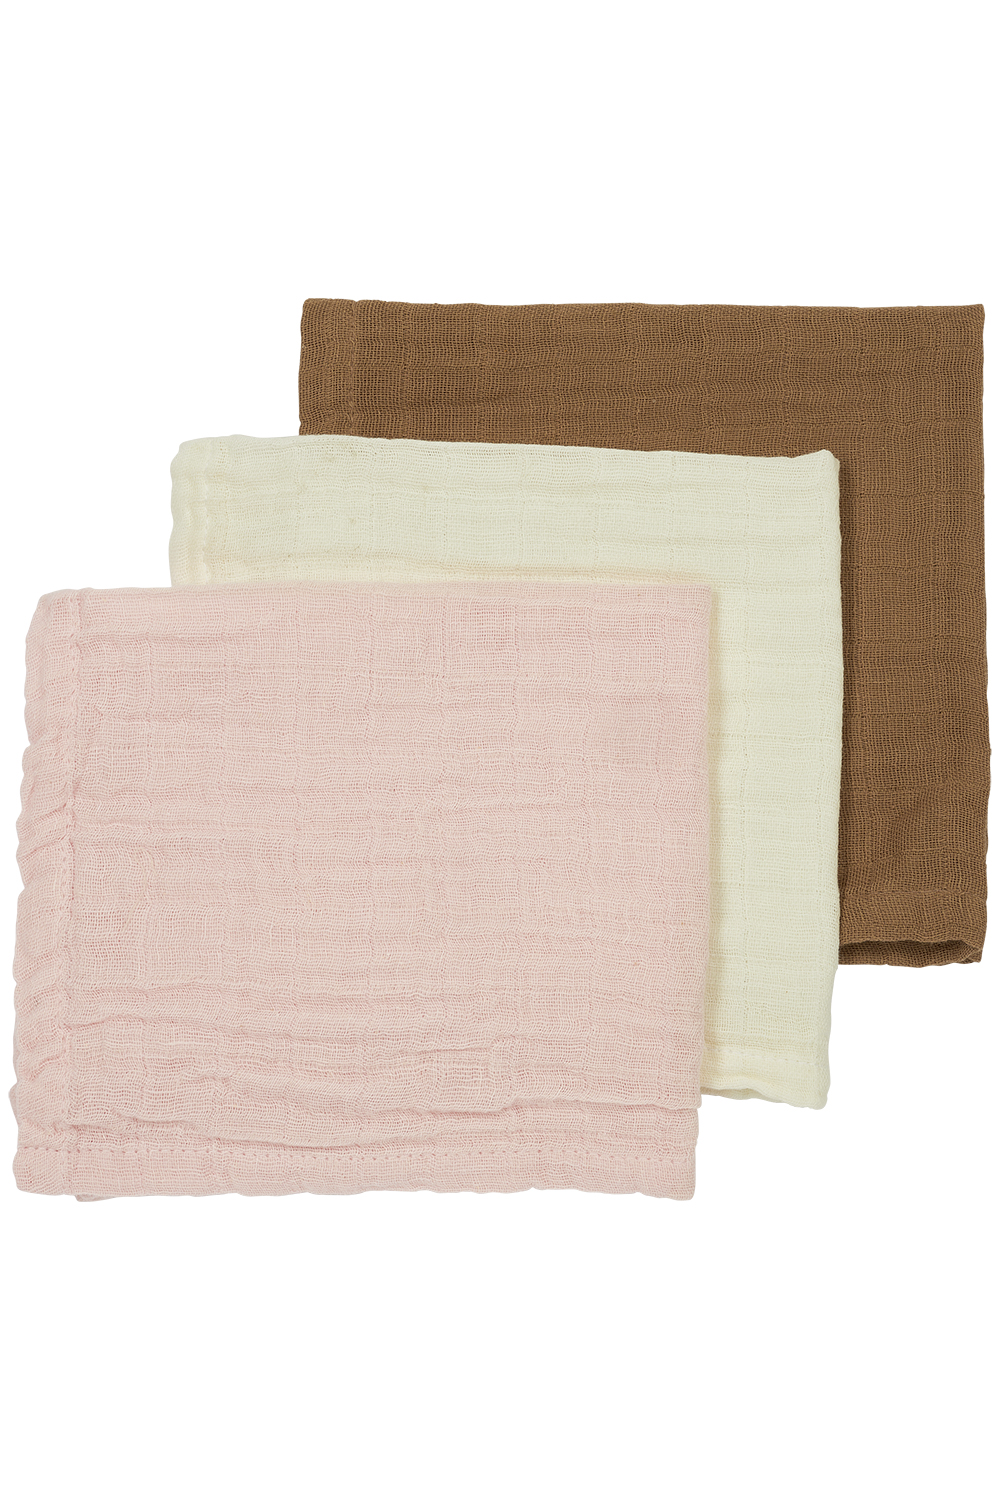 Facecloth 3-pack muslin Uni - offwhite/soft pink/toffee - 30x30cm